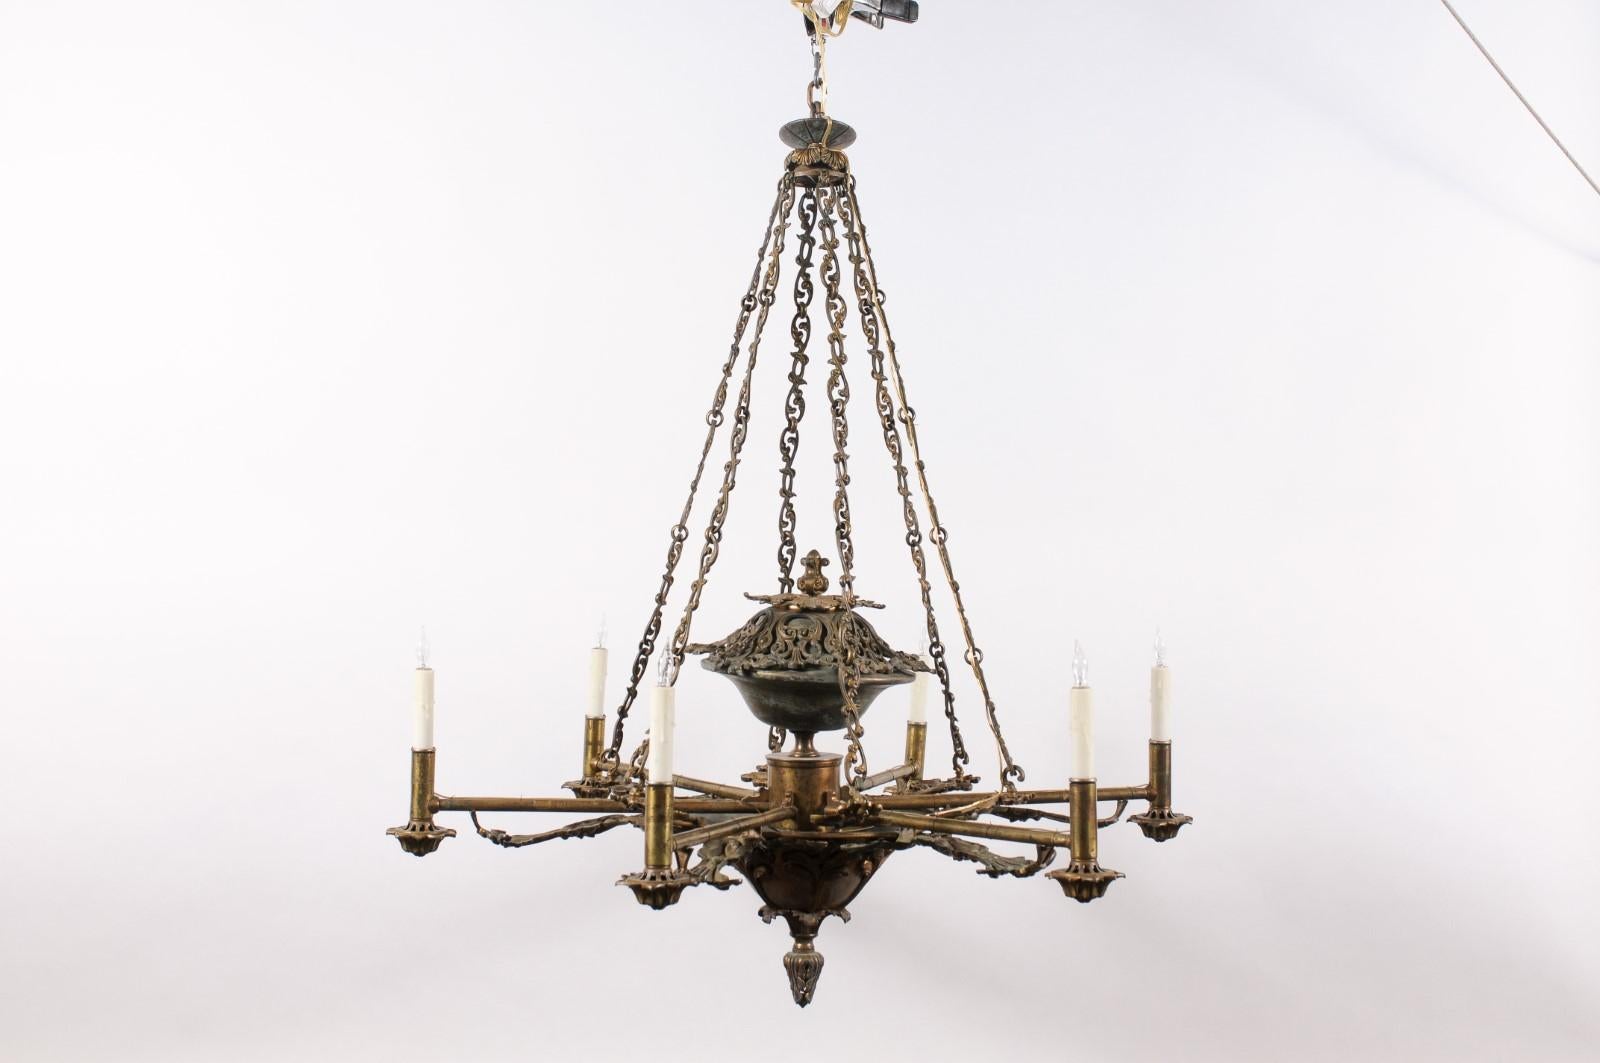  Italian Mid 19th Century Bronze Chandelier with Foliage Detail and 6 Lites For Sale 1